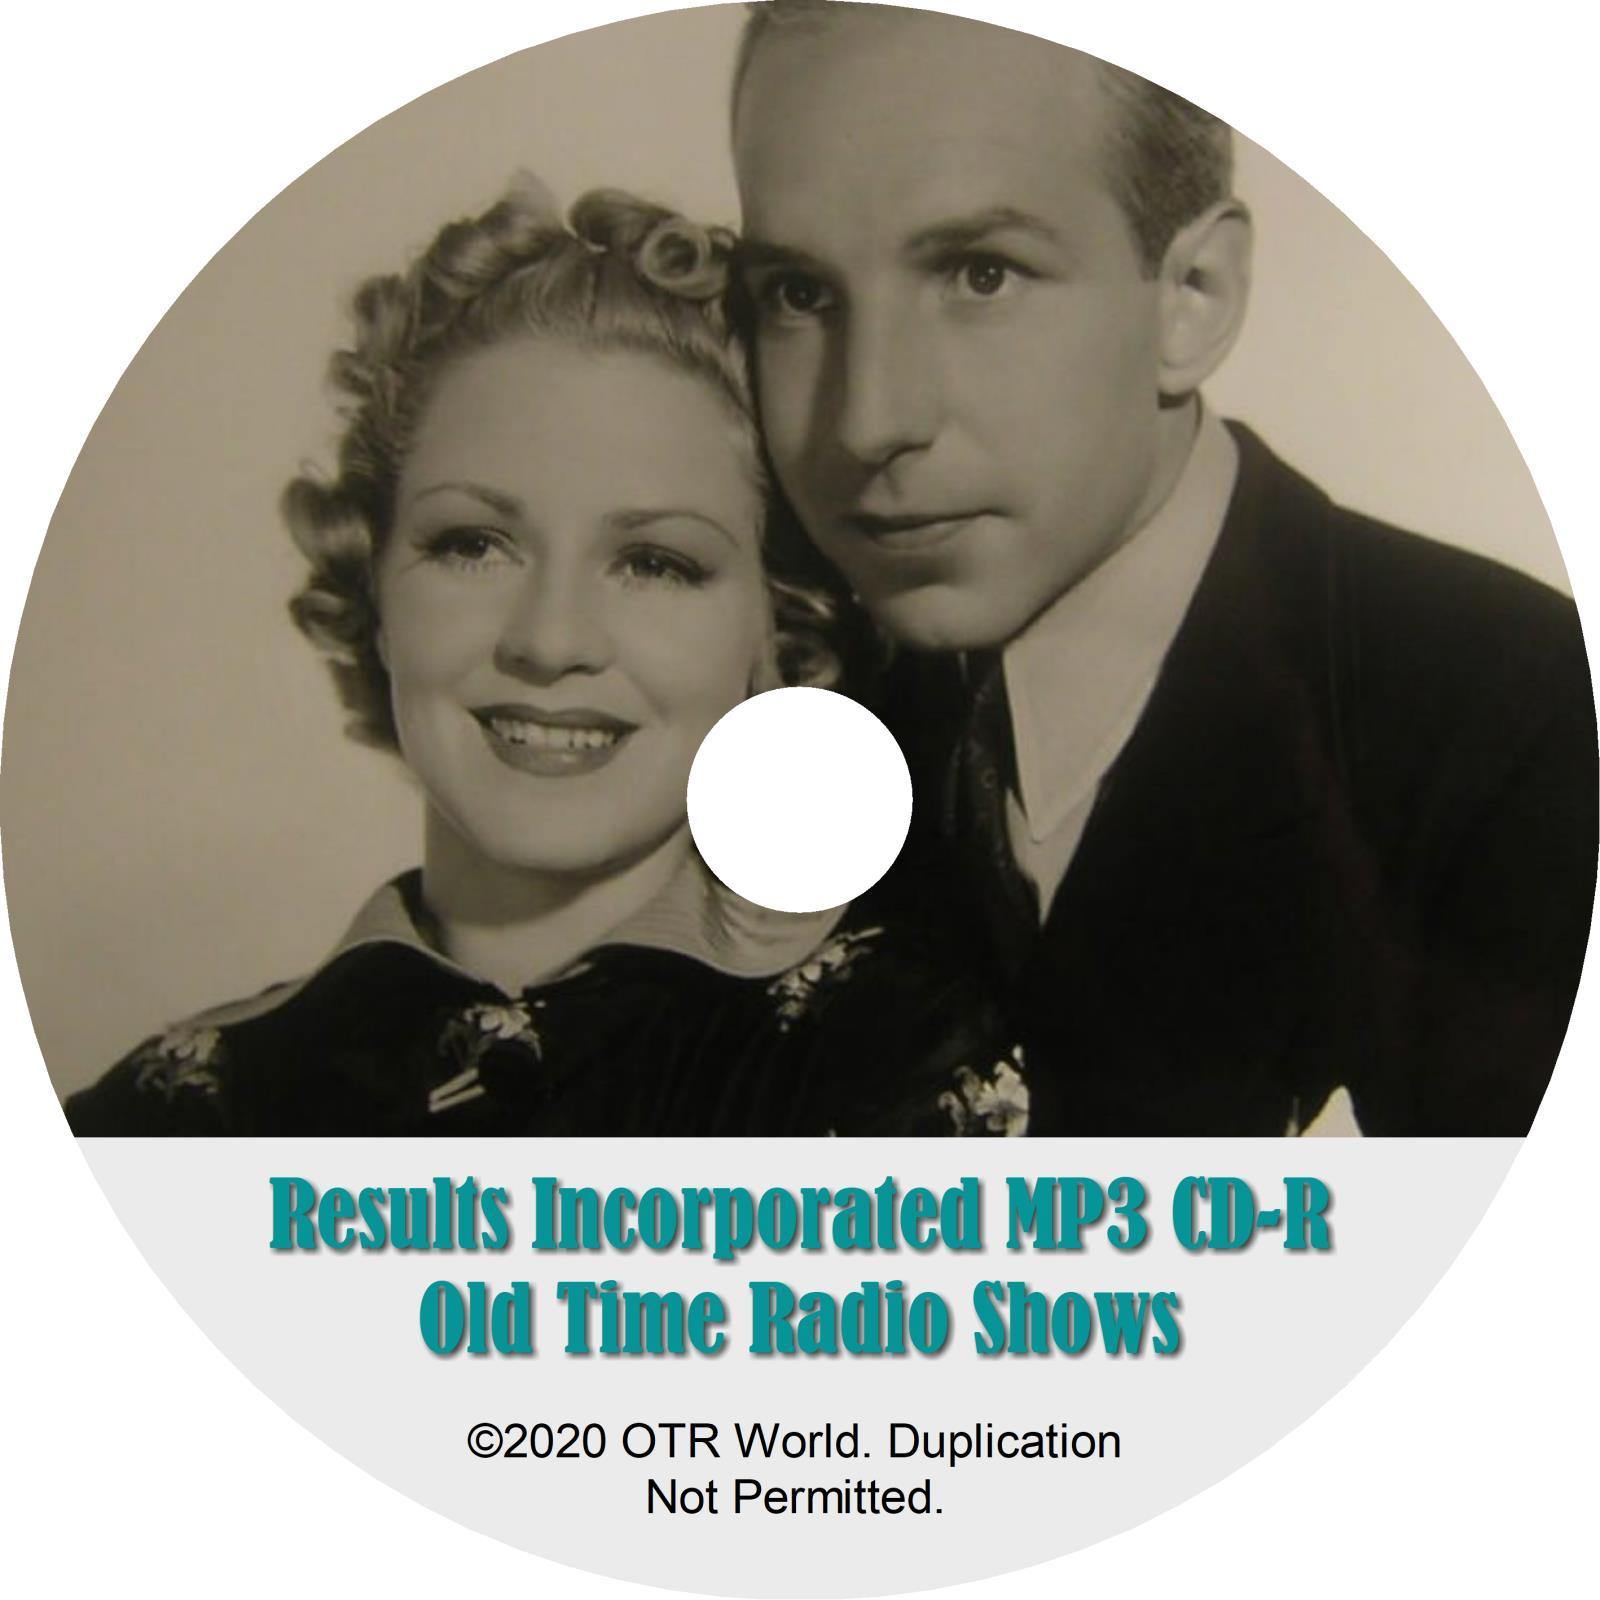 Results Incorporated OTR OTRS Old Time Radio Shows MP3 On CD-R 3 Episodes - OTR World